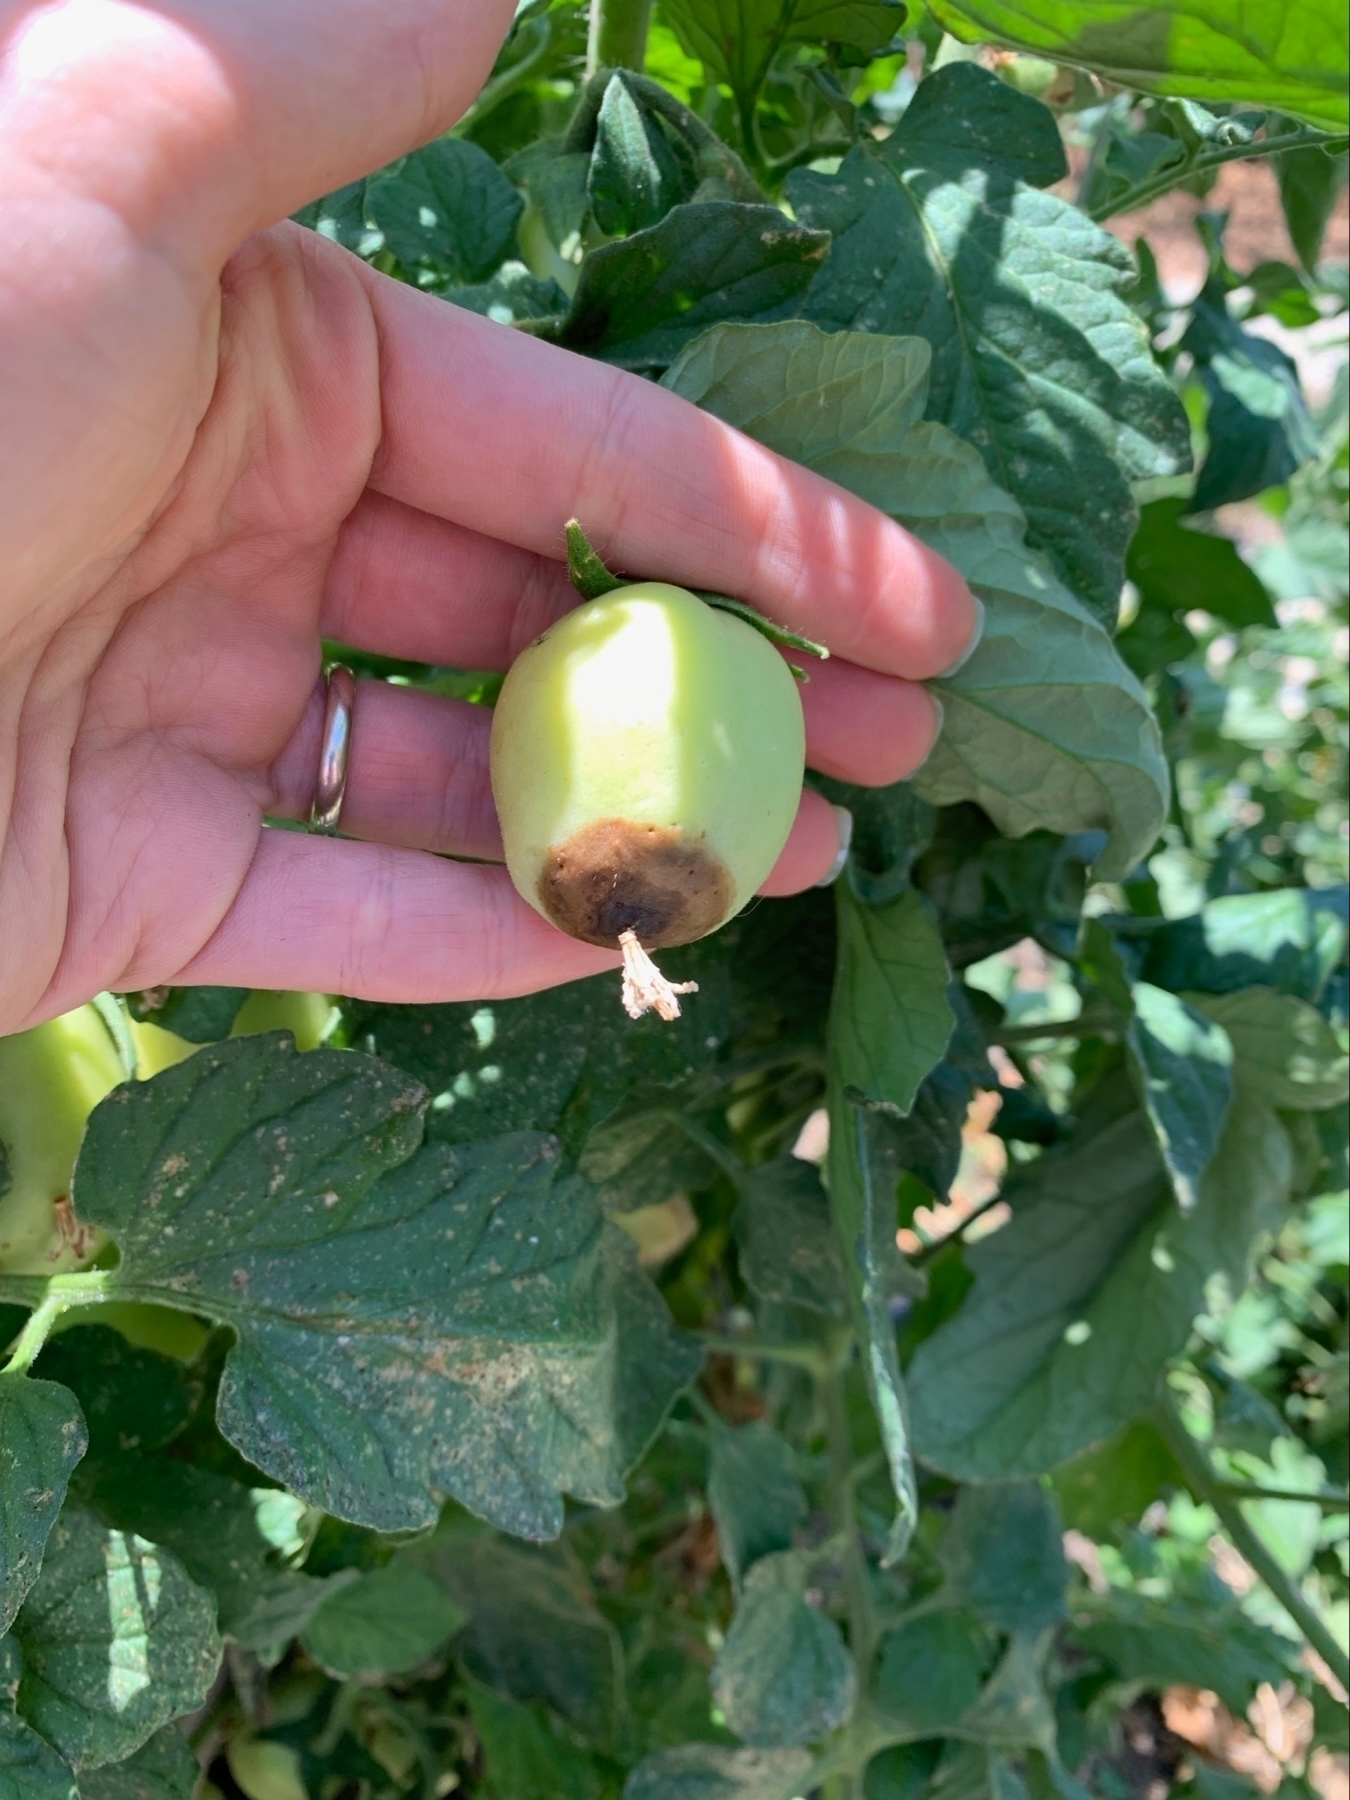 brown end rot on a tomato